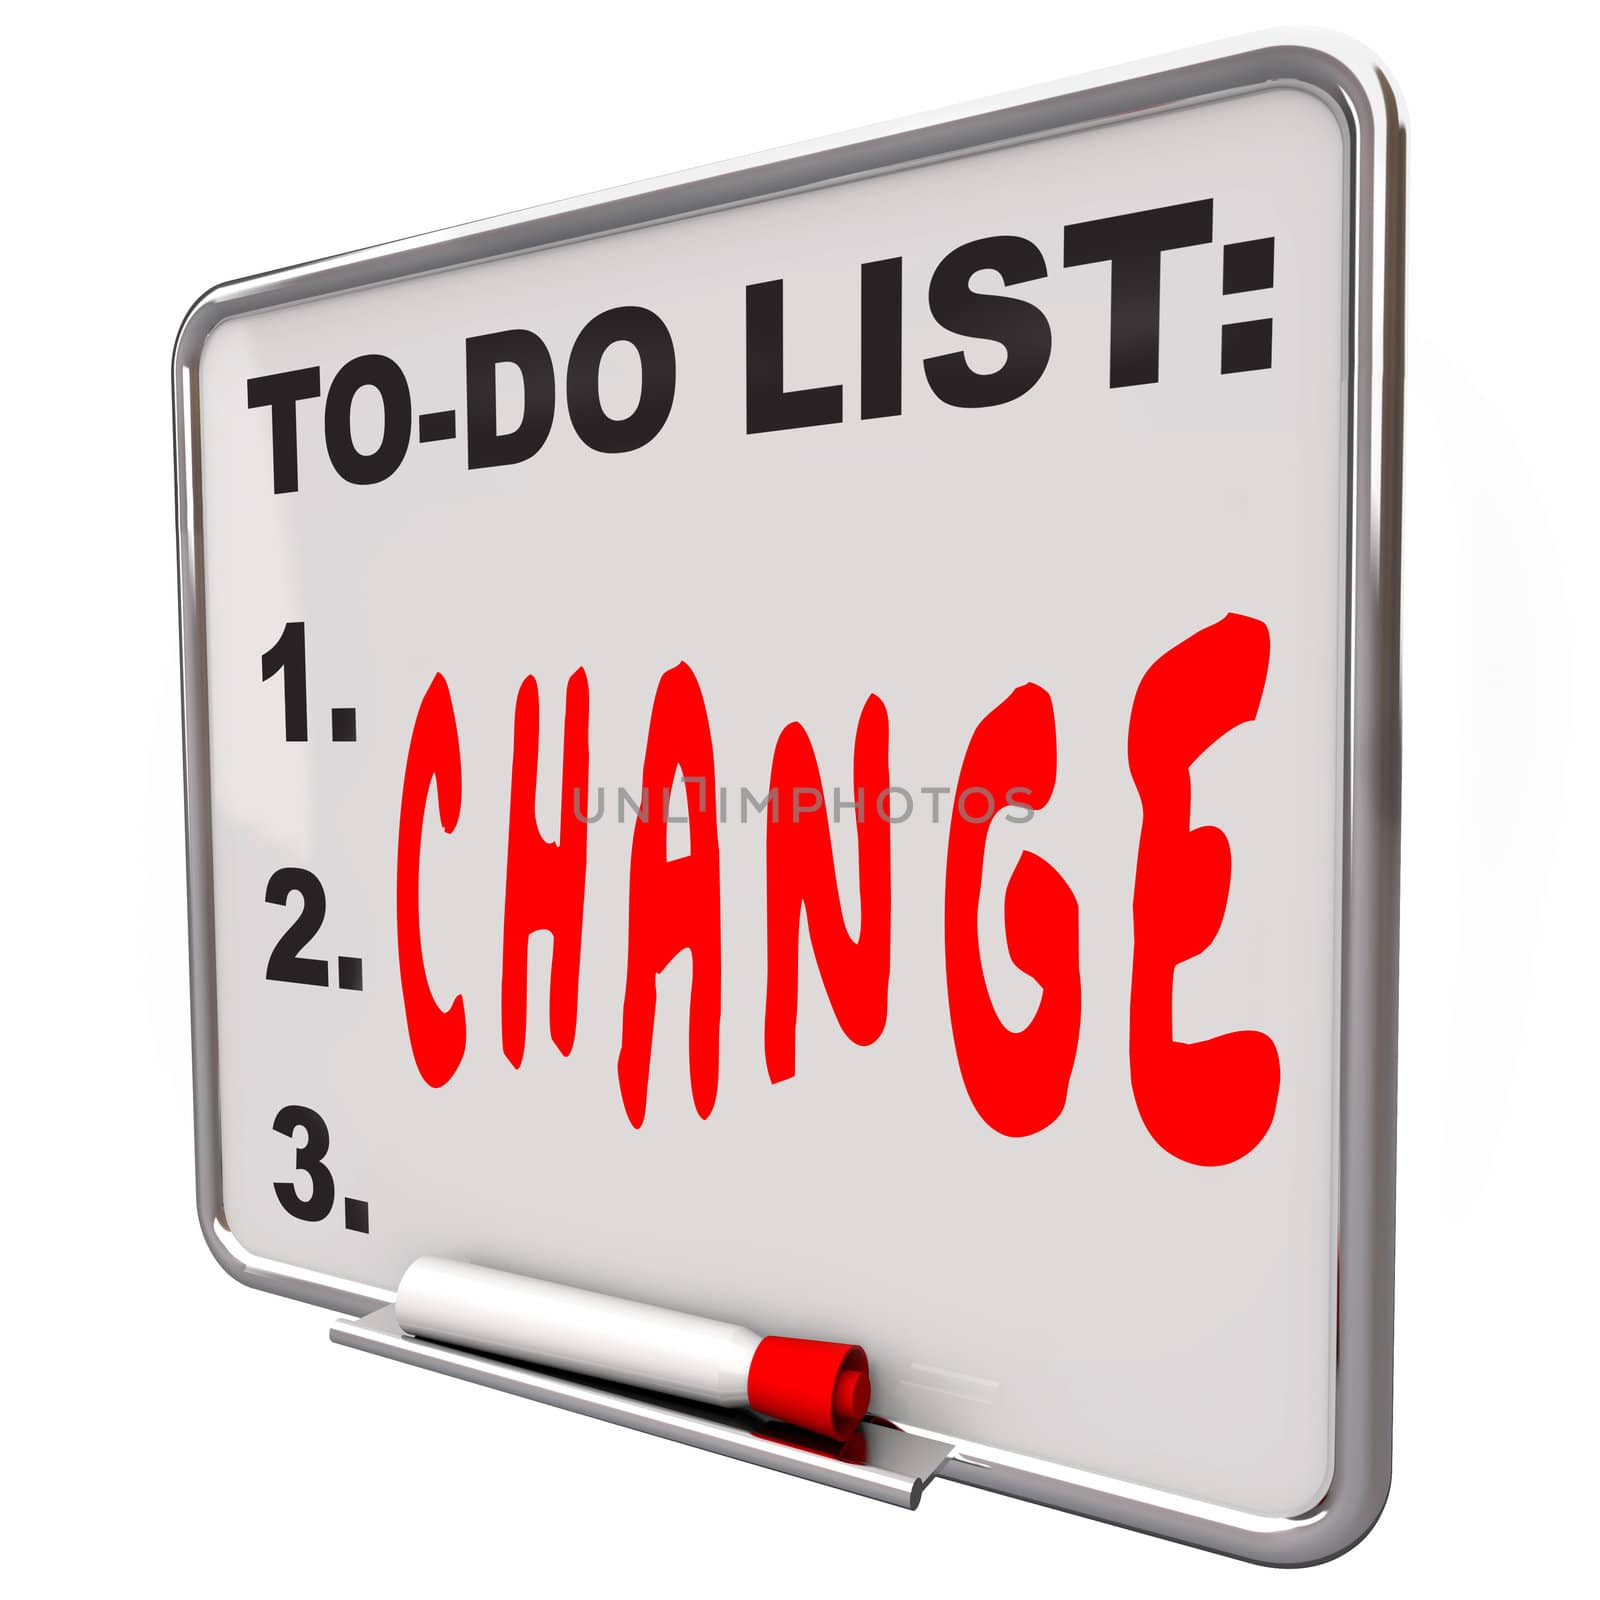 The word Change written under words To Do List on a Dry Erase Board telling you to adapt and improve to succeed in business or life